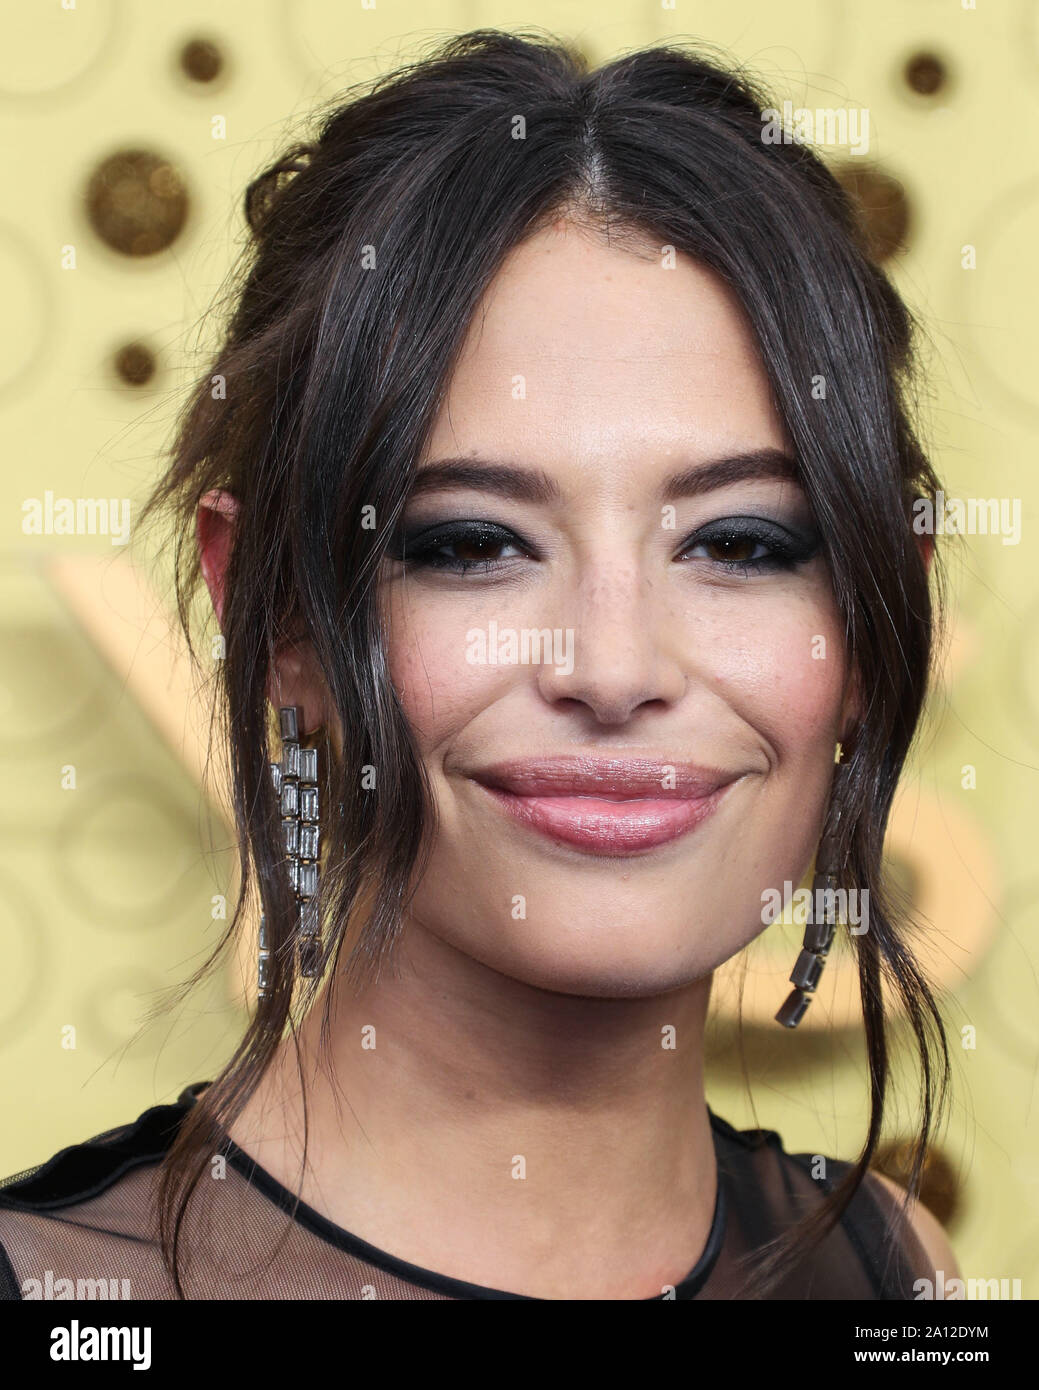 LOS ANGELES, CALIFORNIA, USA - SEPTEMBER 22: Chloe Bridges arrives at the 71st Annual Primetime Emmy Awards held at Microsoft Theater L.A. Live on September 22, 2019 in Los Angeles, California, United States. (Photo by Xavier Collin/Image Press Agency) Stock Photo